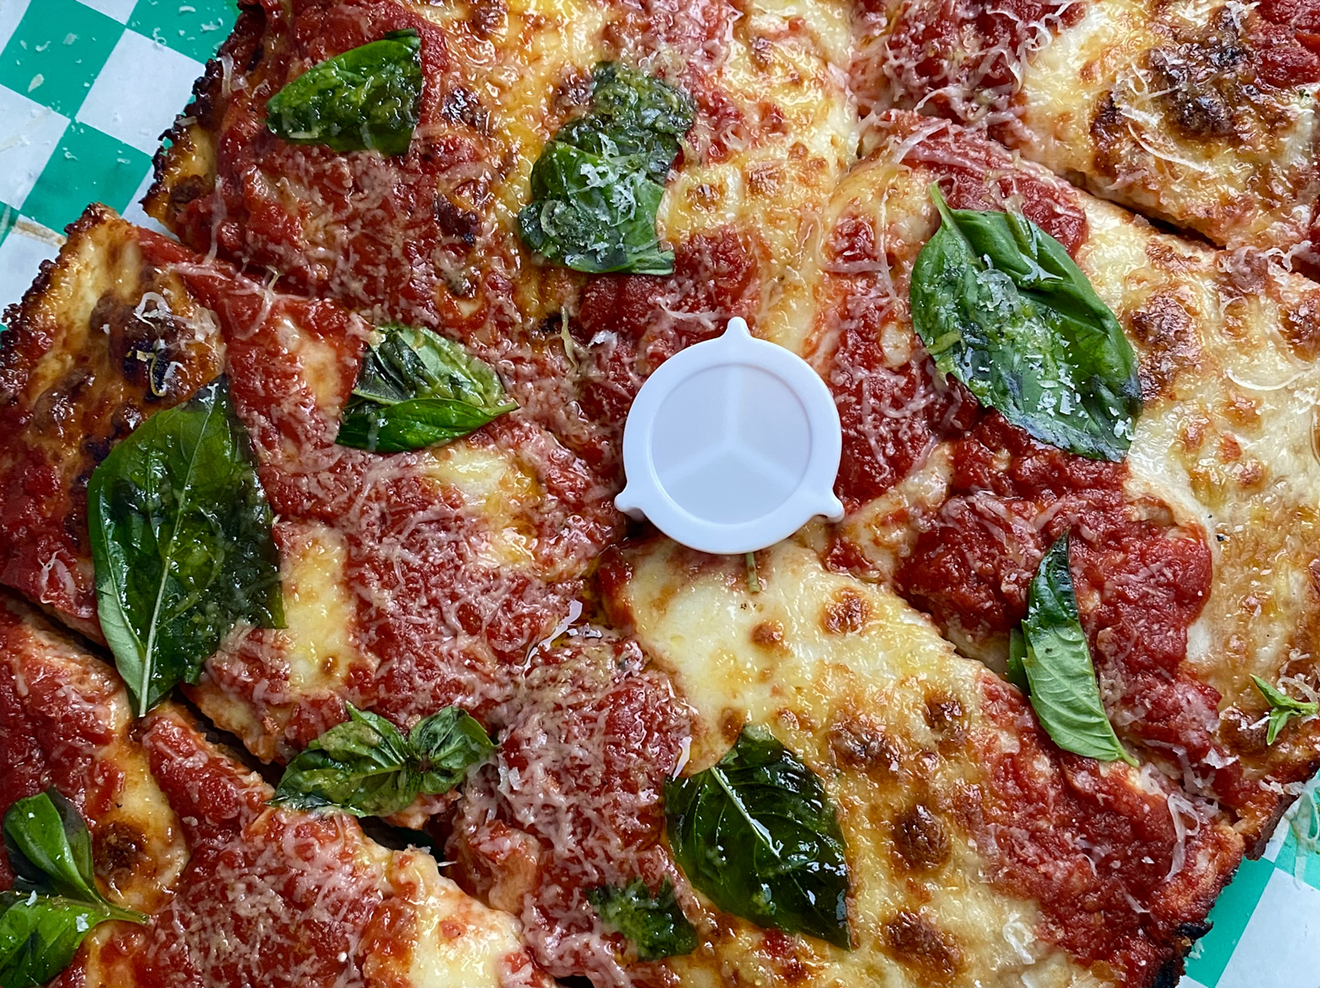 A close-up photo of a pizza from Old Greg's Pizza in Miami taken during their pop-up in July 2020